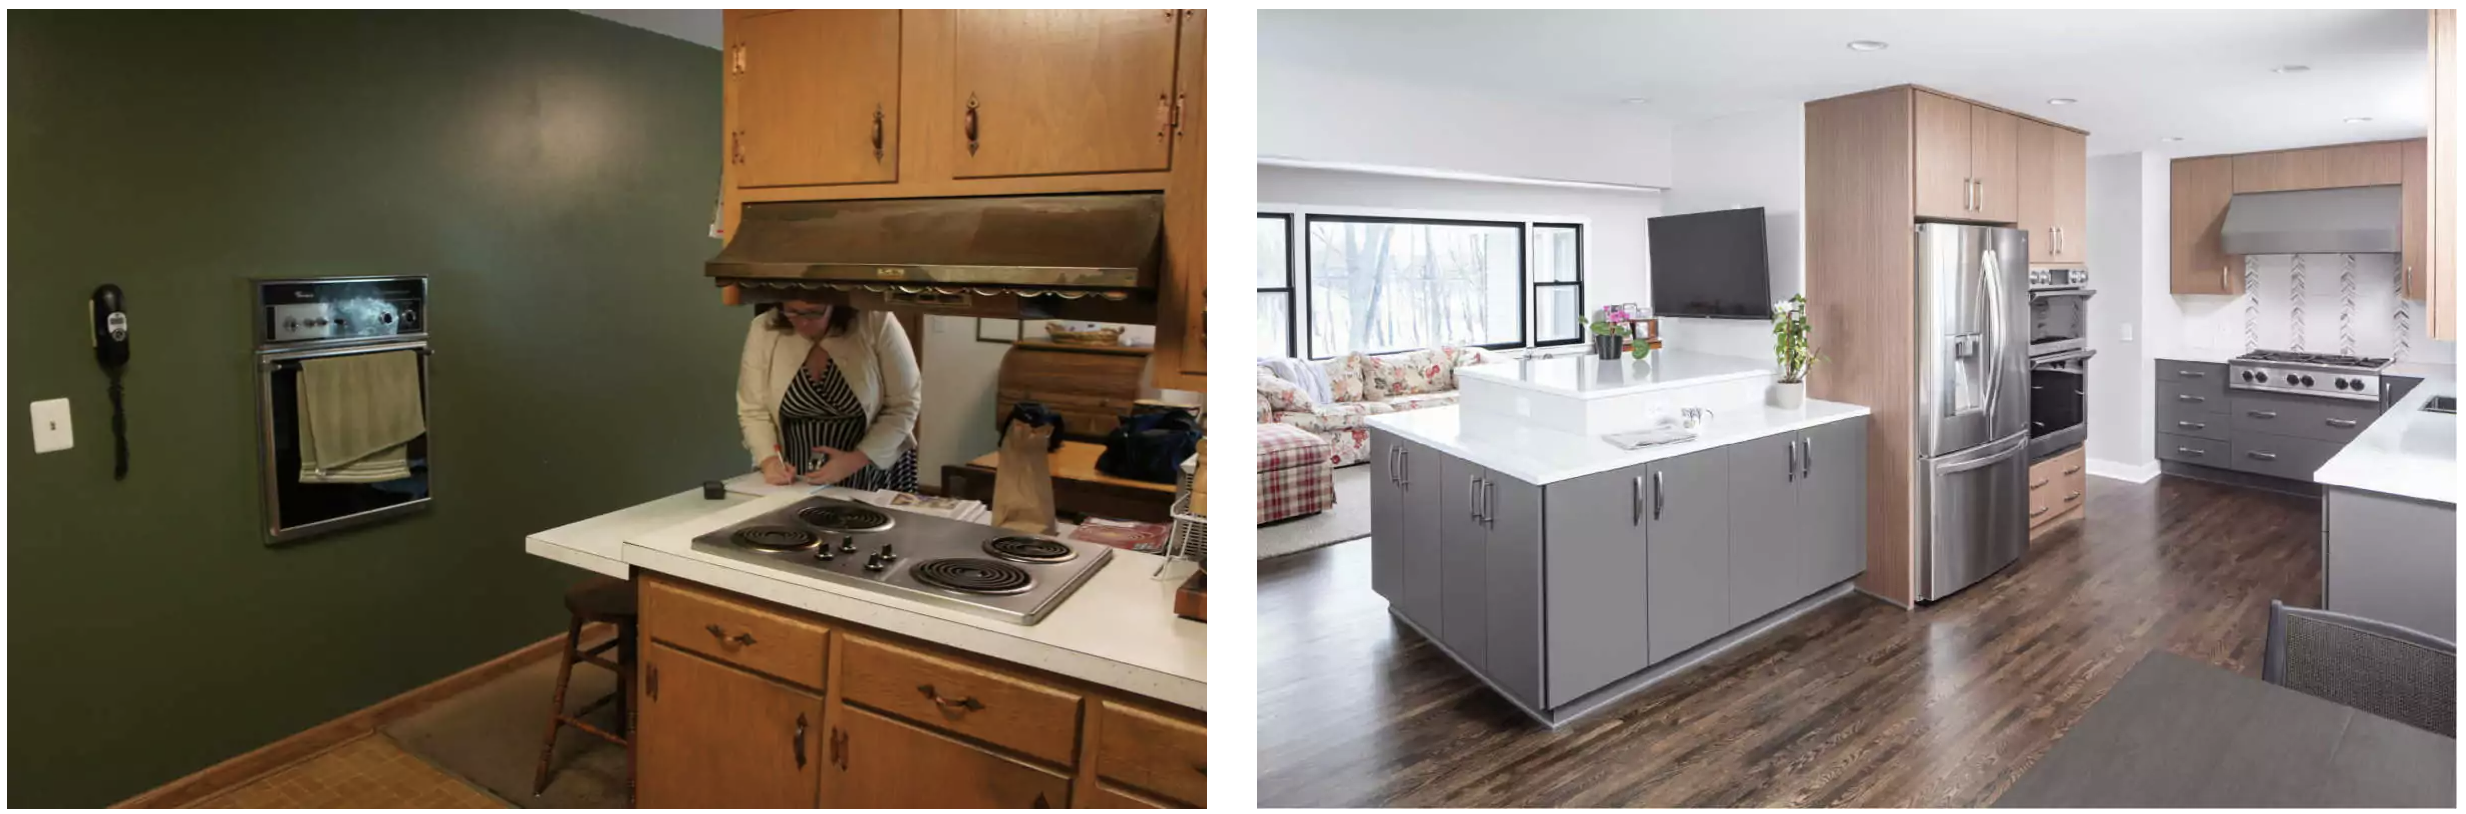 Before and after image of kitchen remodel with swapped dining room and kitchen. 